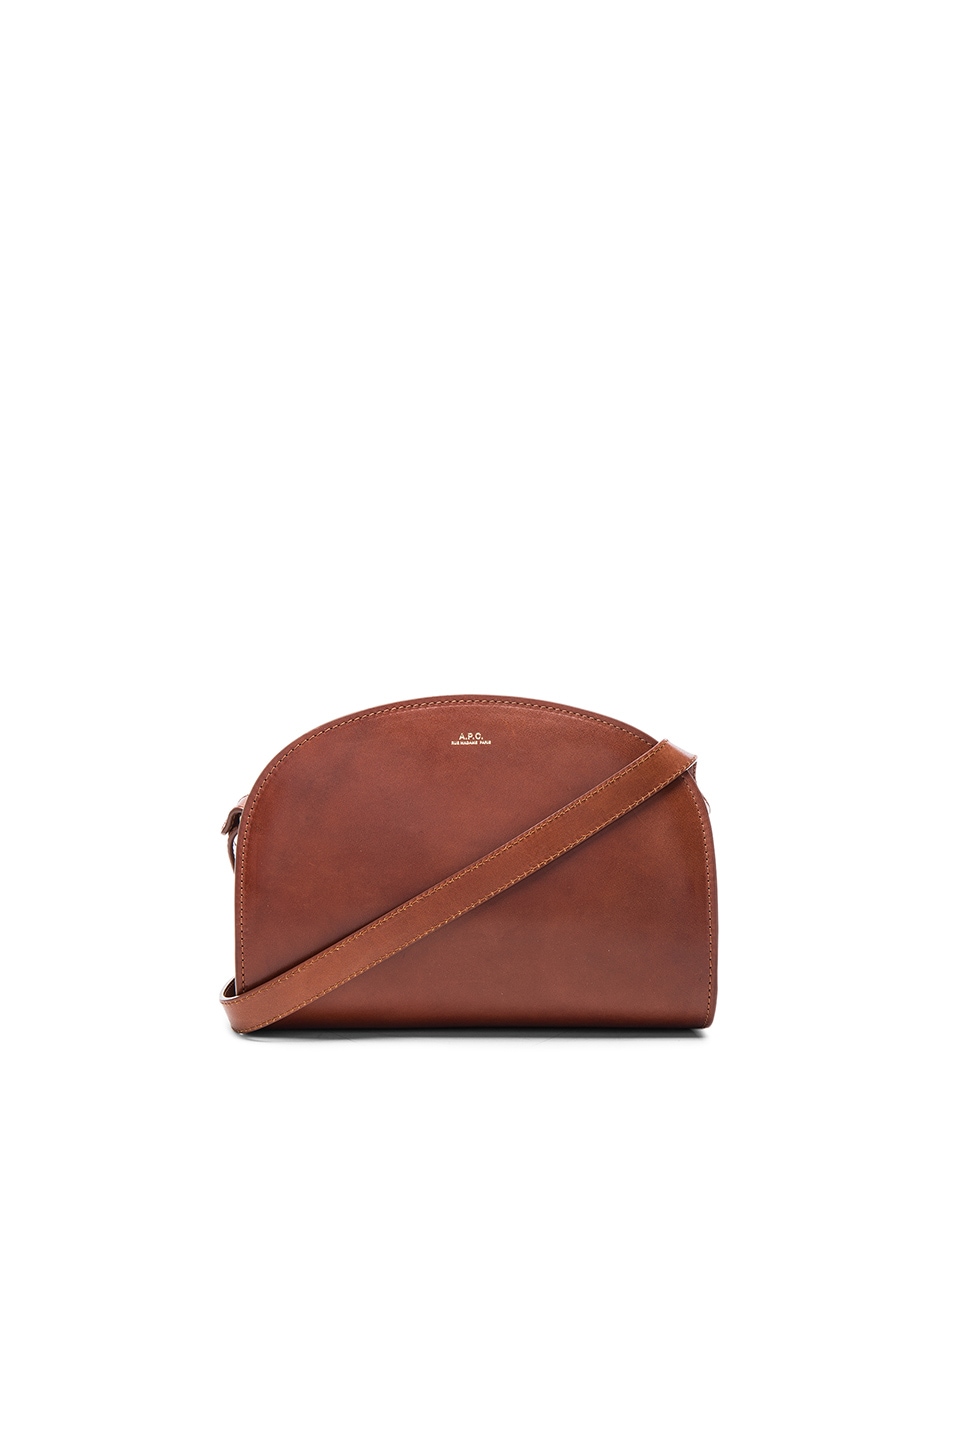 Image 1 of A.P.C. Demi Lune Bag in Noisette